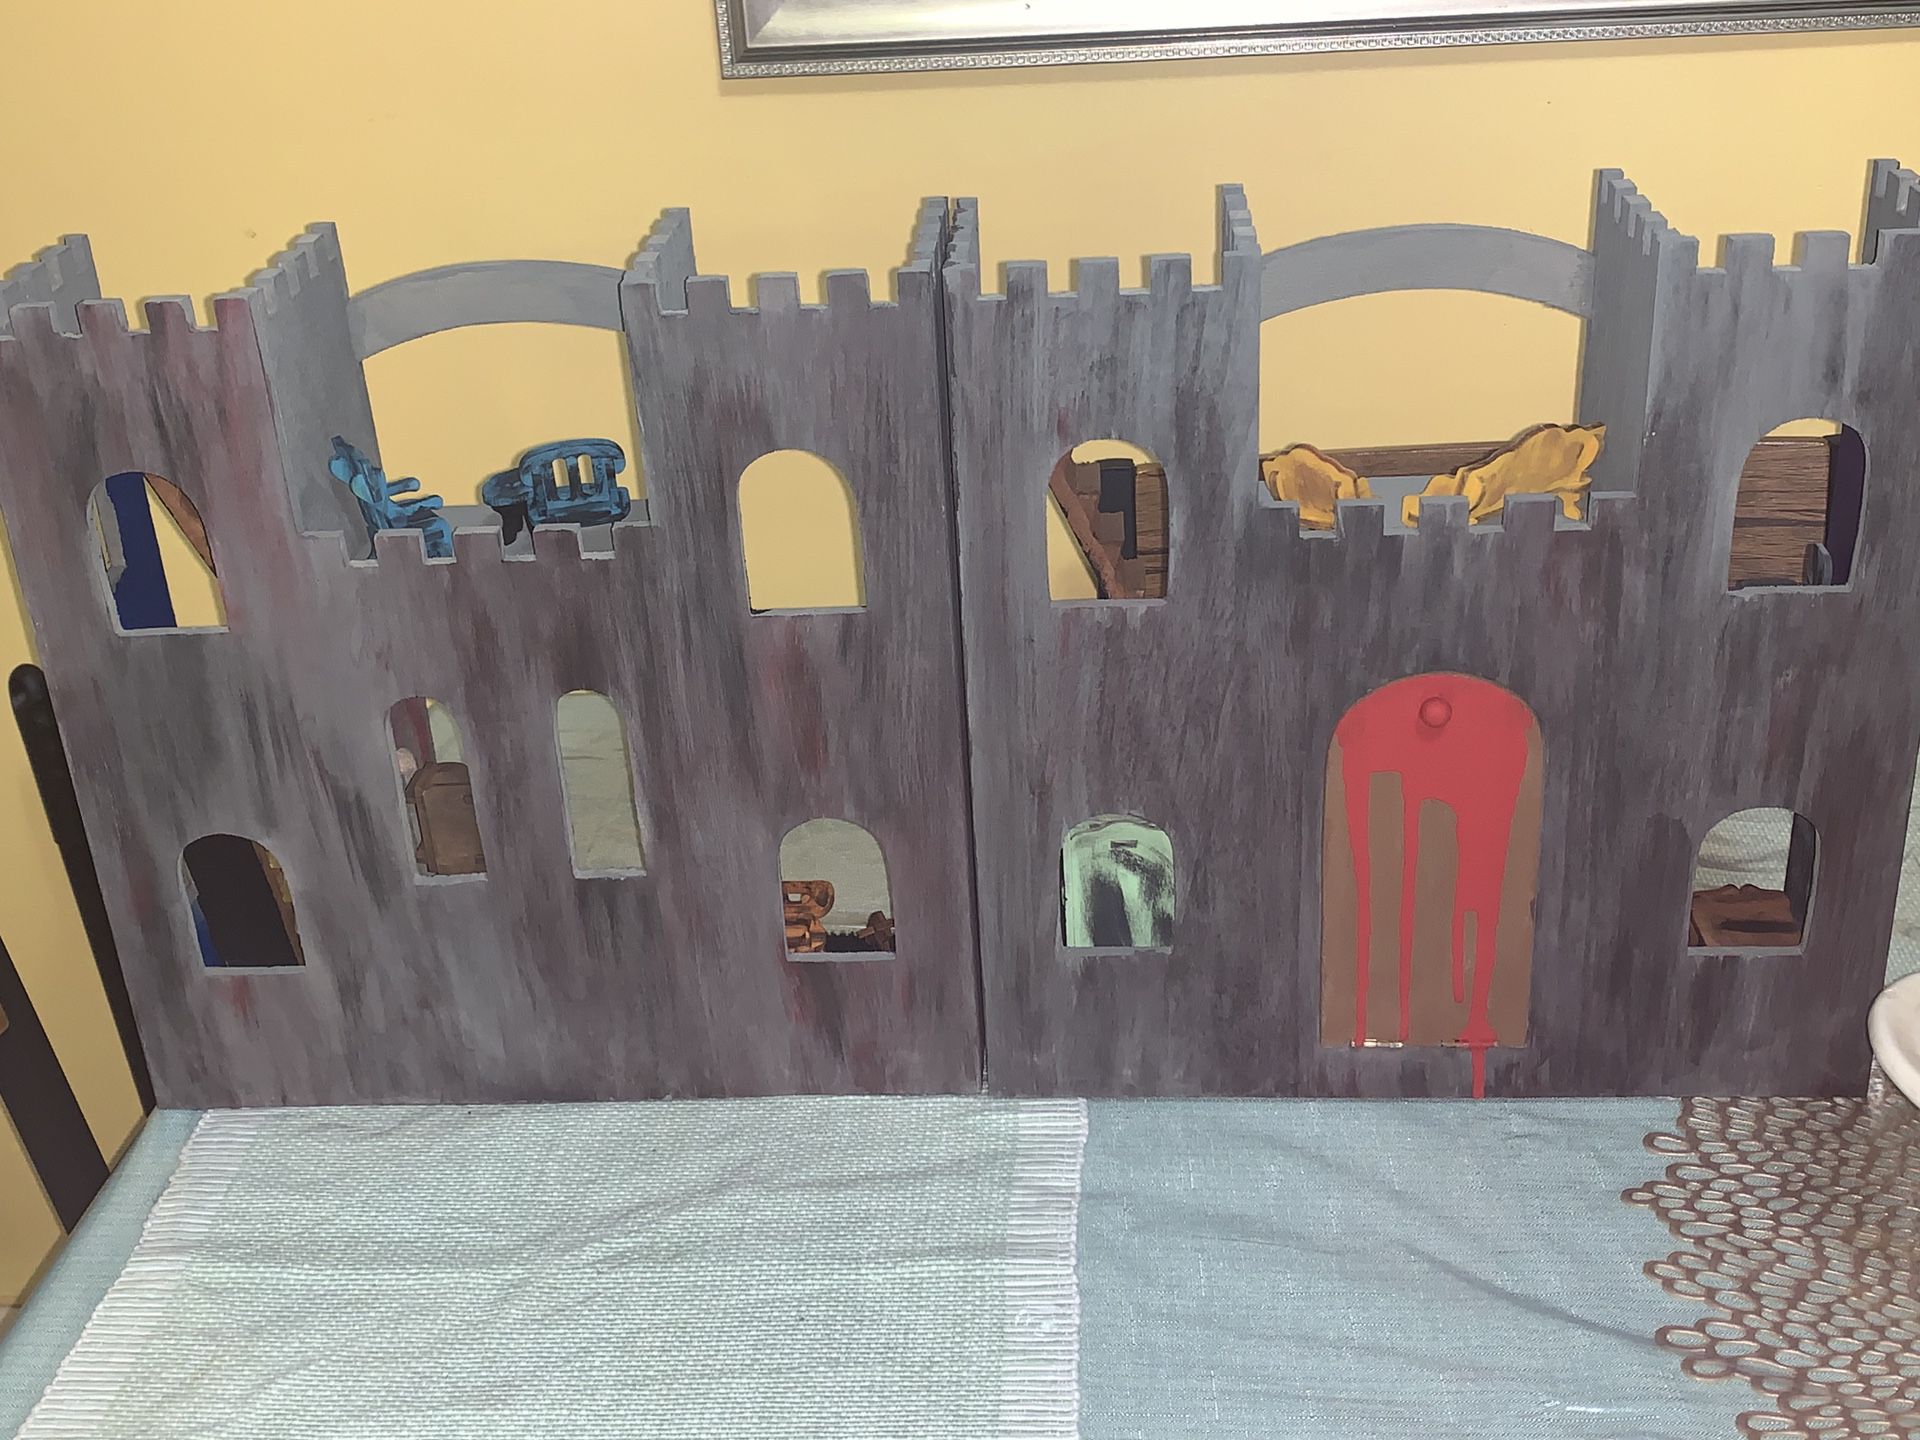 Haunted castle handmade hand painted whit all woods furniture $150 rare Halloween toy